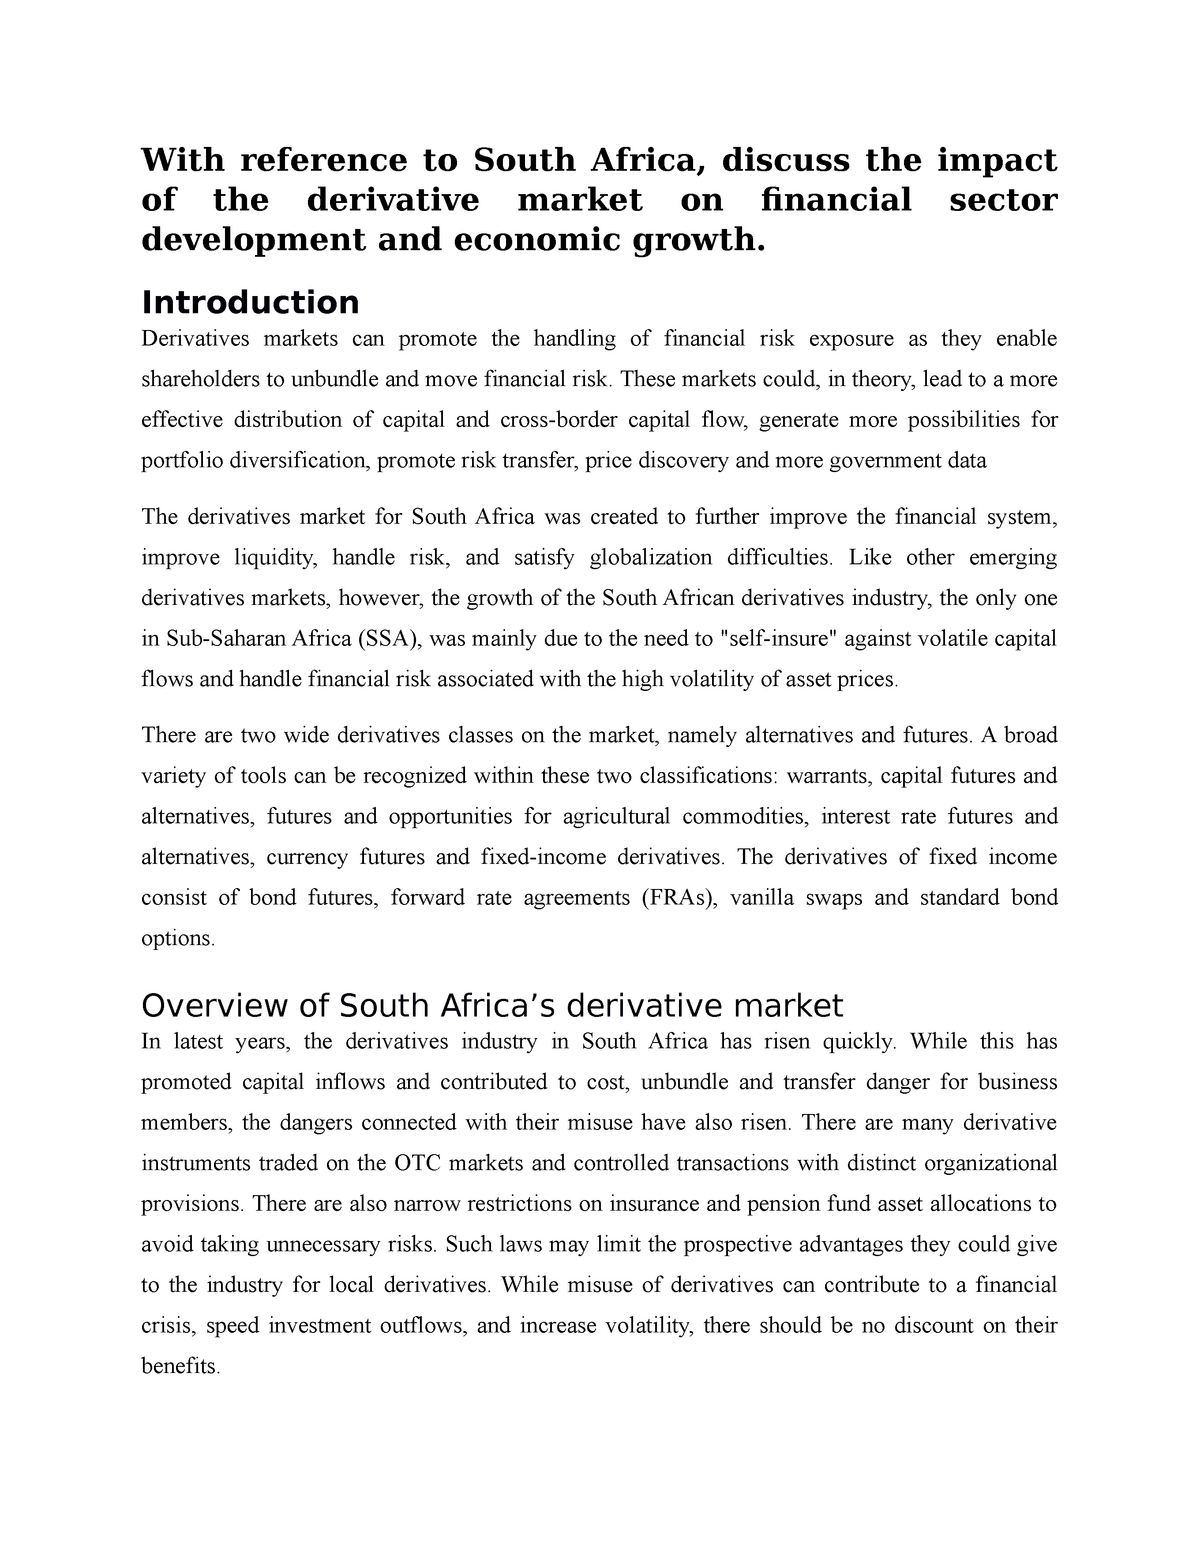 With reference to South Africa - Introduction Derivatives markets can ...